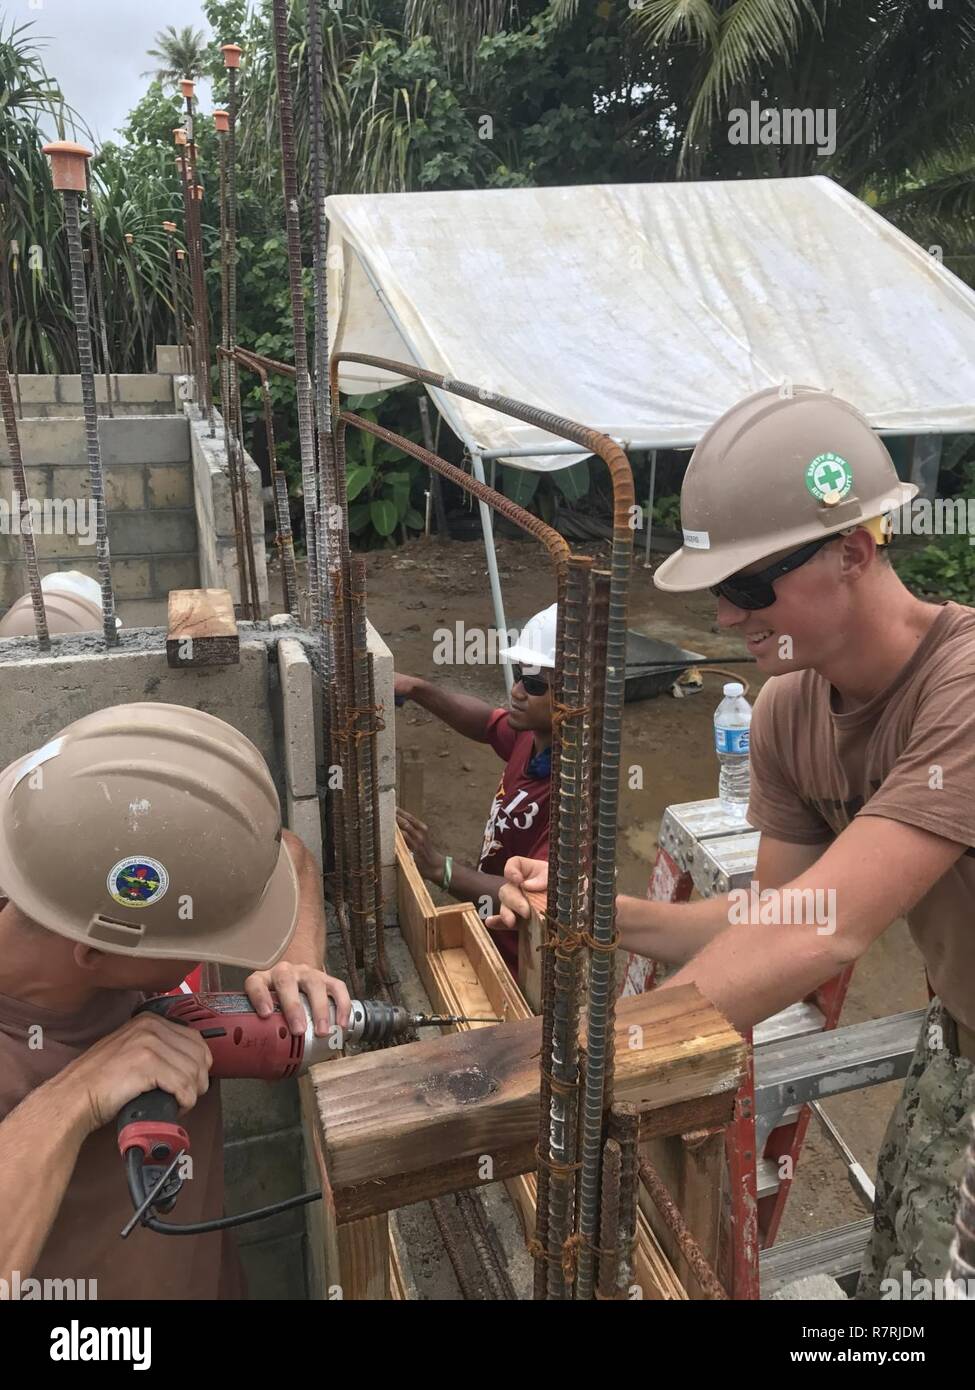 KOSRAE, Micronesia (March 28, 2017) Builder Constructionman Skylar Lunders, right, and Builder 3rd Class Alexander Zebro, both assigned to Naval Mobile Construction Battalion (NMCB) 1, drill framework for the exterior windows on the Walung Health Clinic in Kosrae, Micronesia. NMCB-1 is forward deployed to execute construction, humanitarian and foreign assistance, special operations combat service support, and theater security cooperation in support of U.S. Pacific Command. Stock Photo